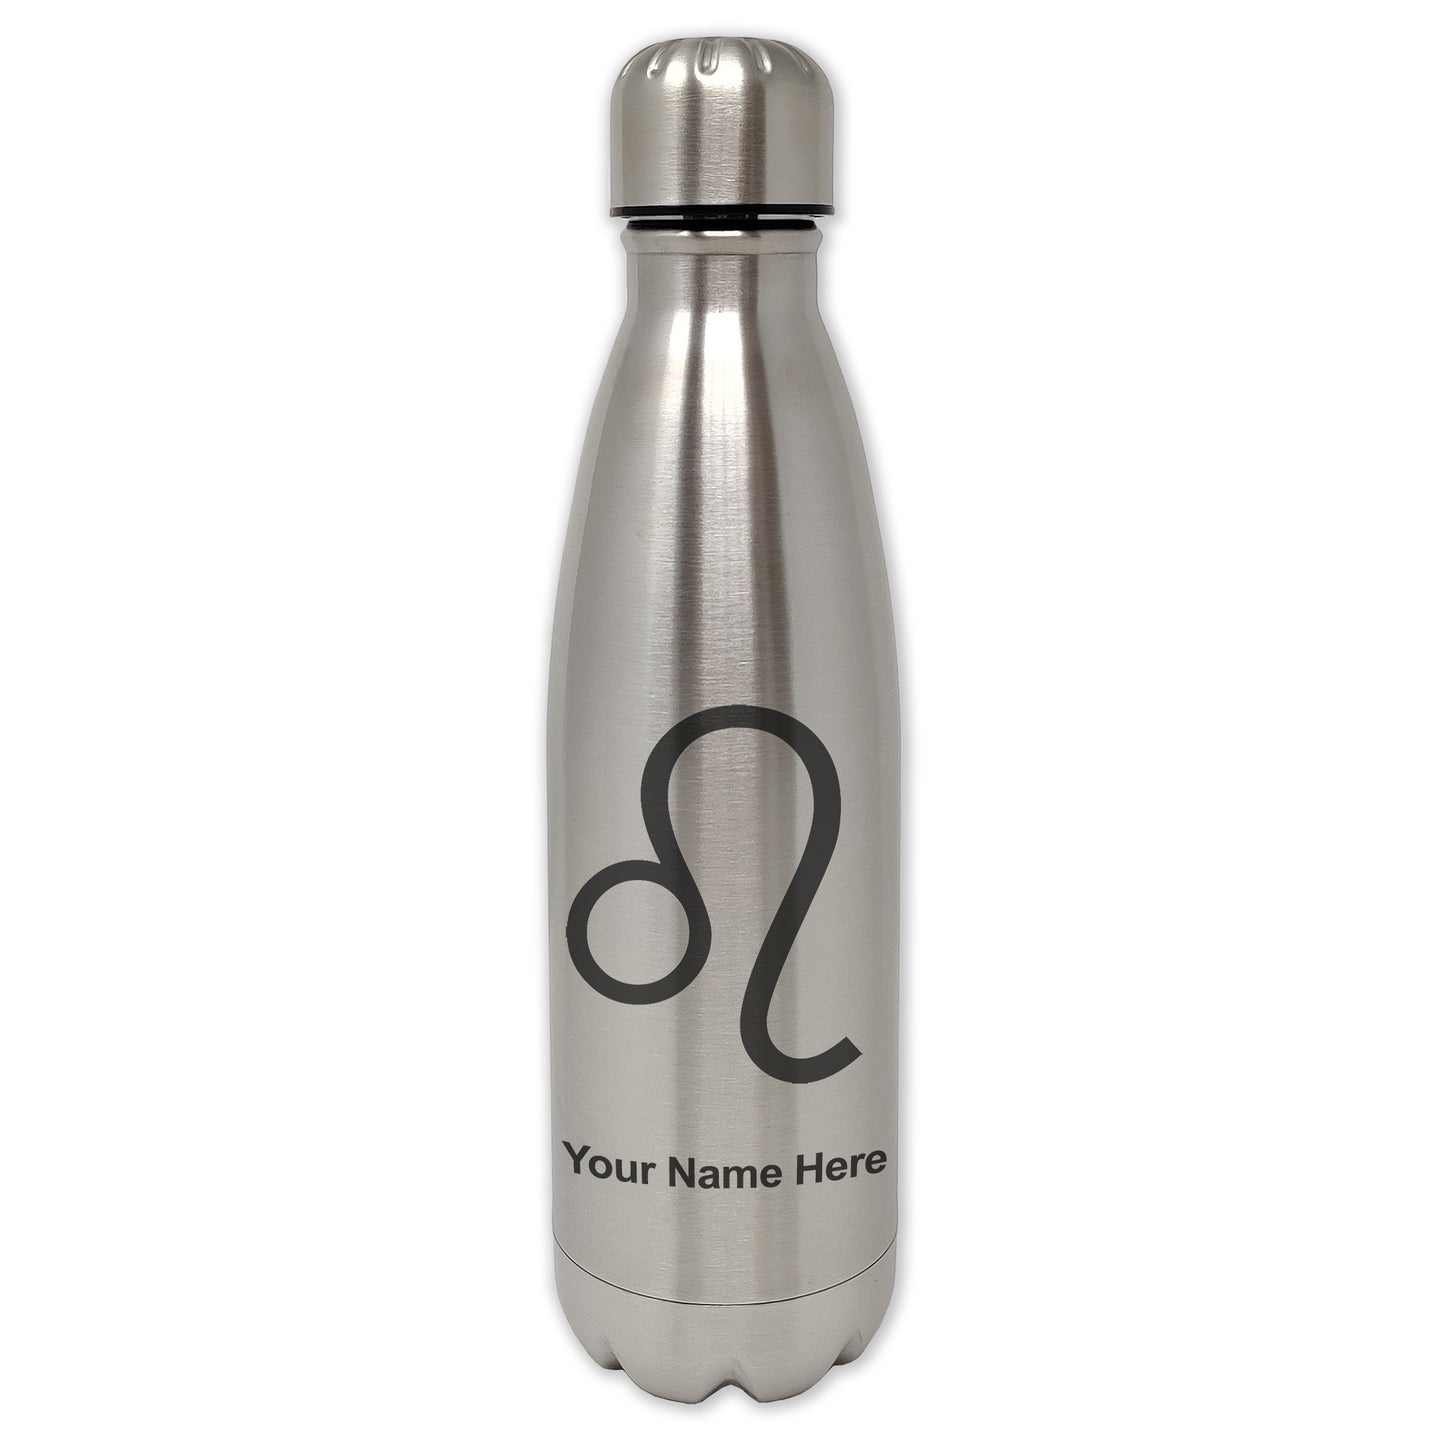 LaserGram Double Wall Water Bottle, Zodiac Sign Leo, Personalized Engraving Included